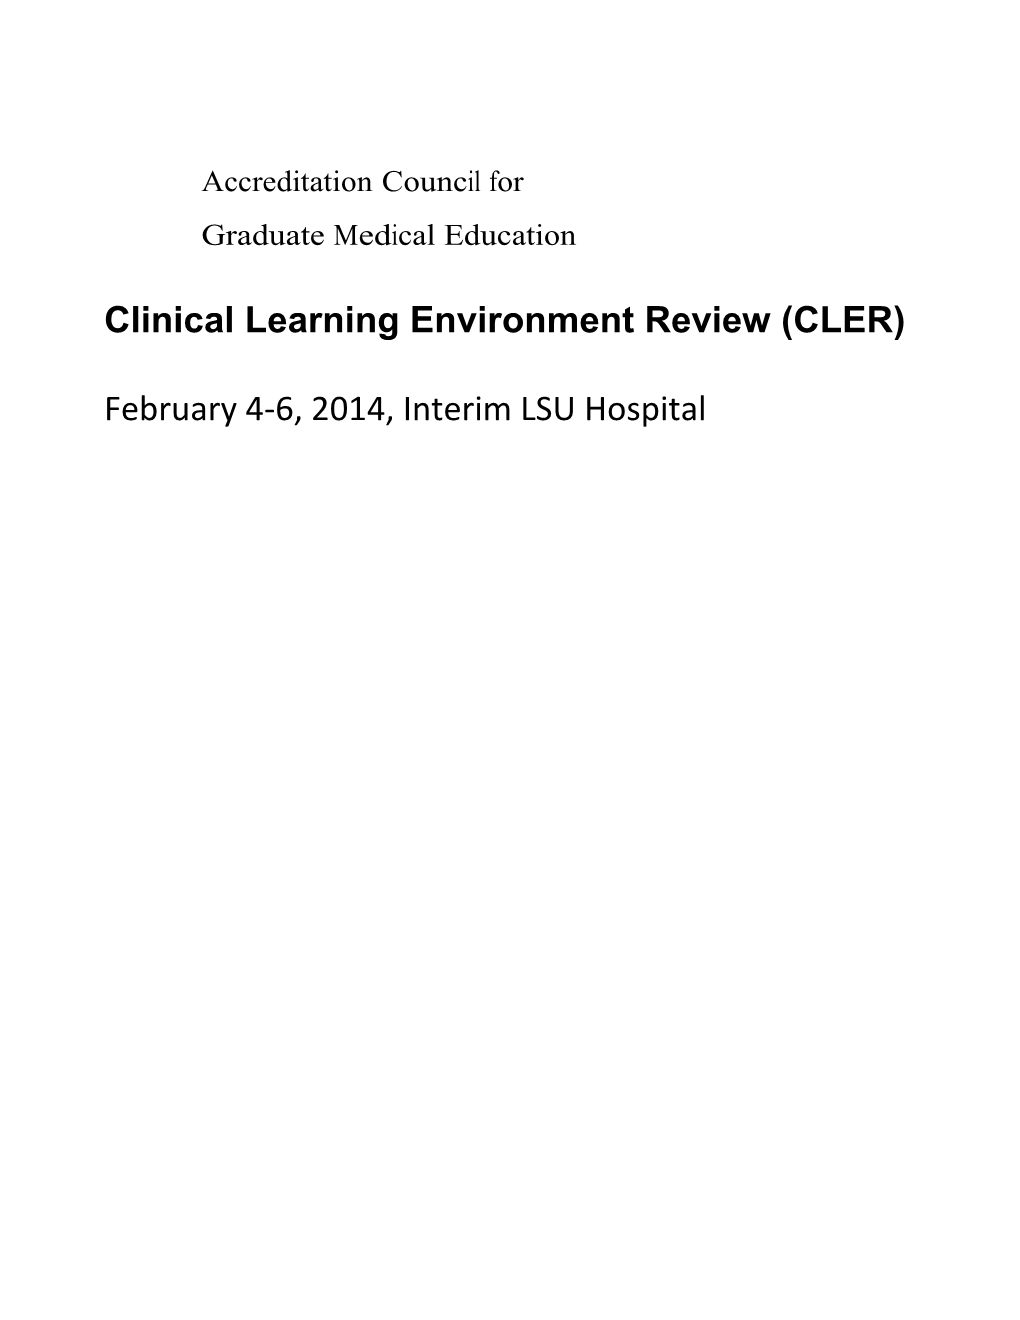 Clinicallearningenvironmentreview(CLER)